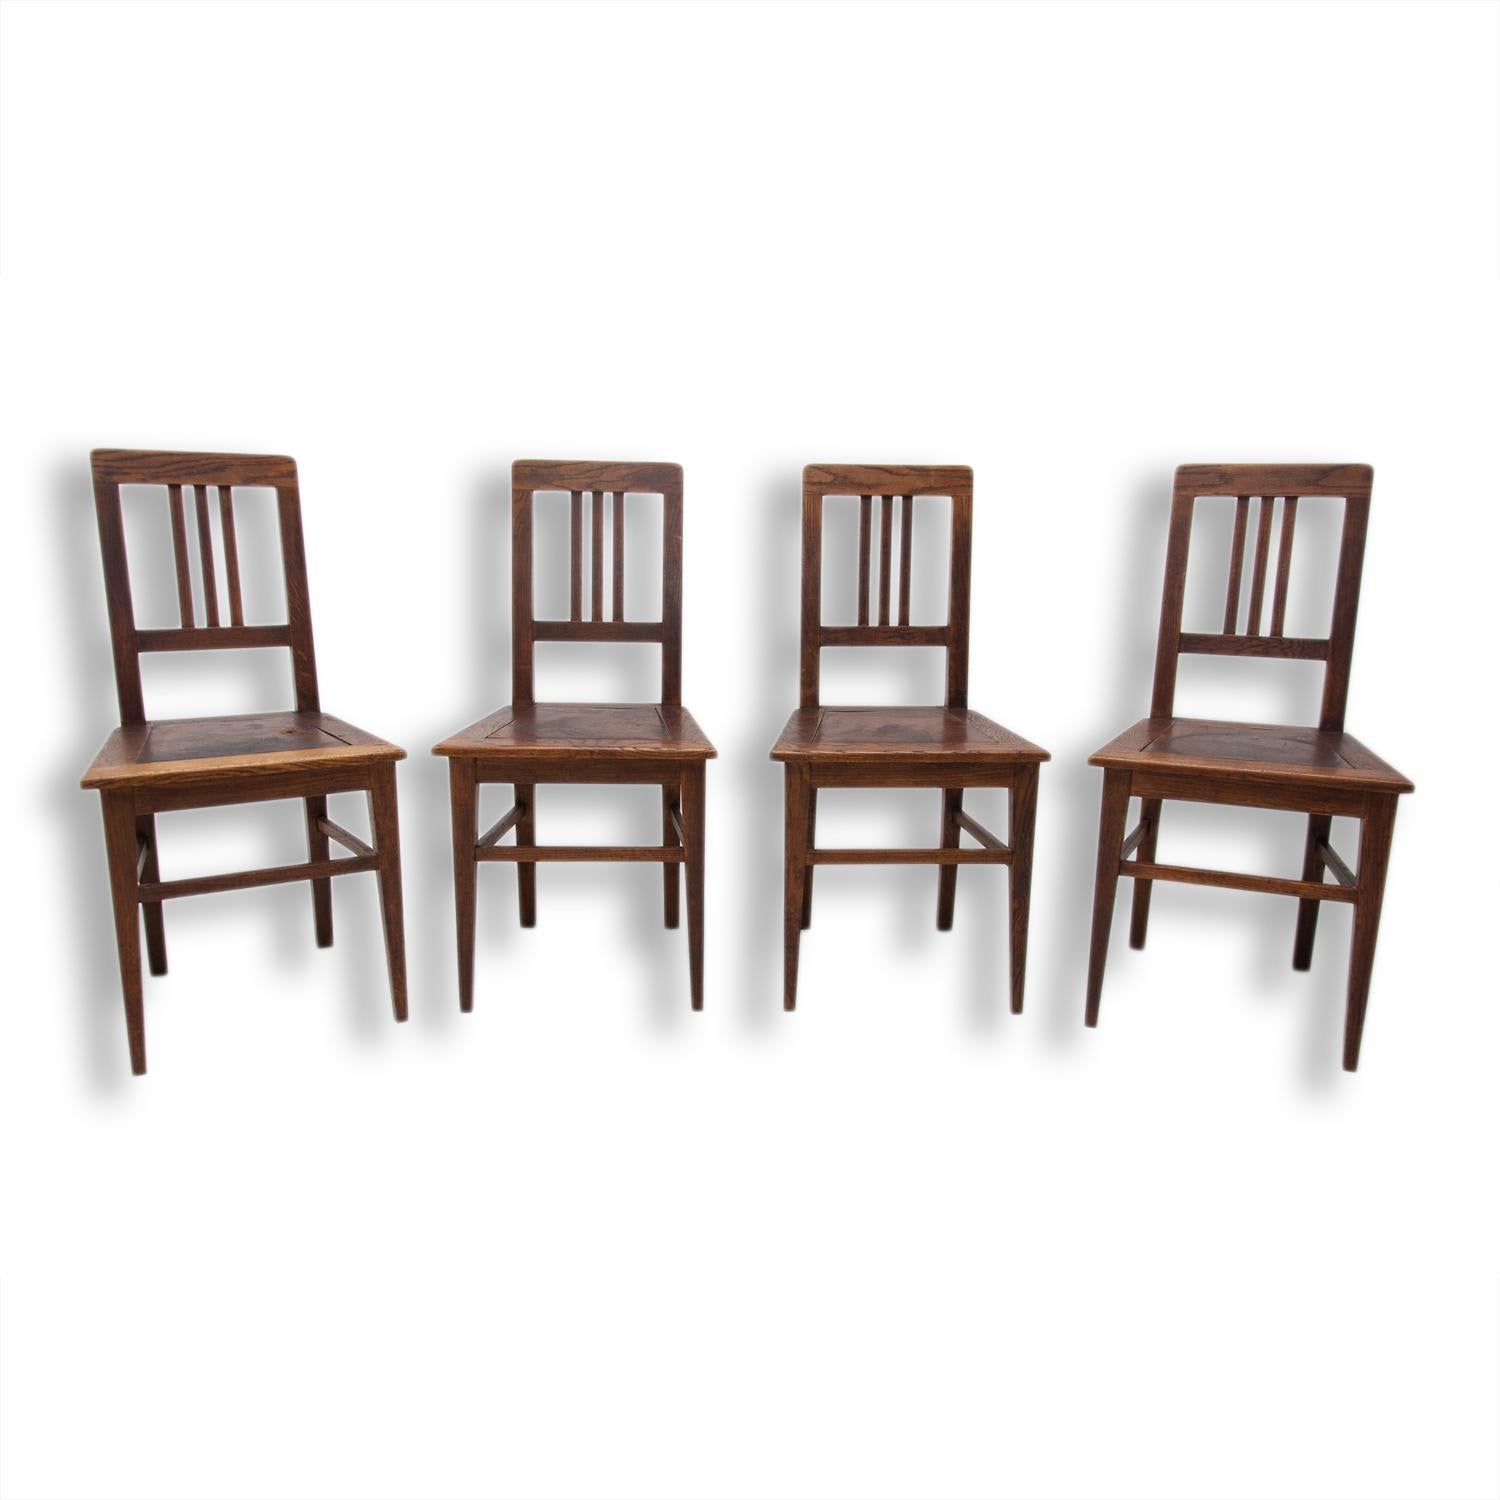 These Art Nouveau dining chairs were made in Austria-Hungary, circa 1910. They are made of dark stained oakwood. They have original leather upholstery. The chairs are in very good condition. Price is for the set of four.

 